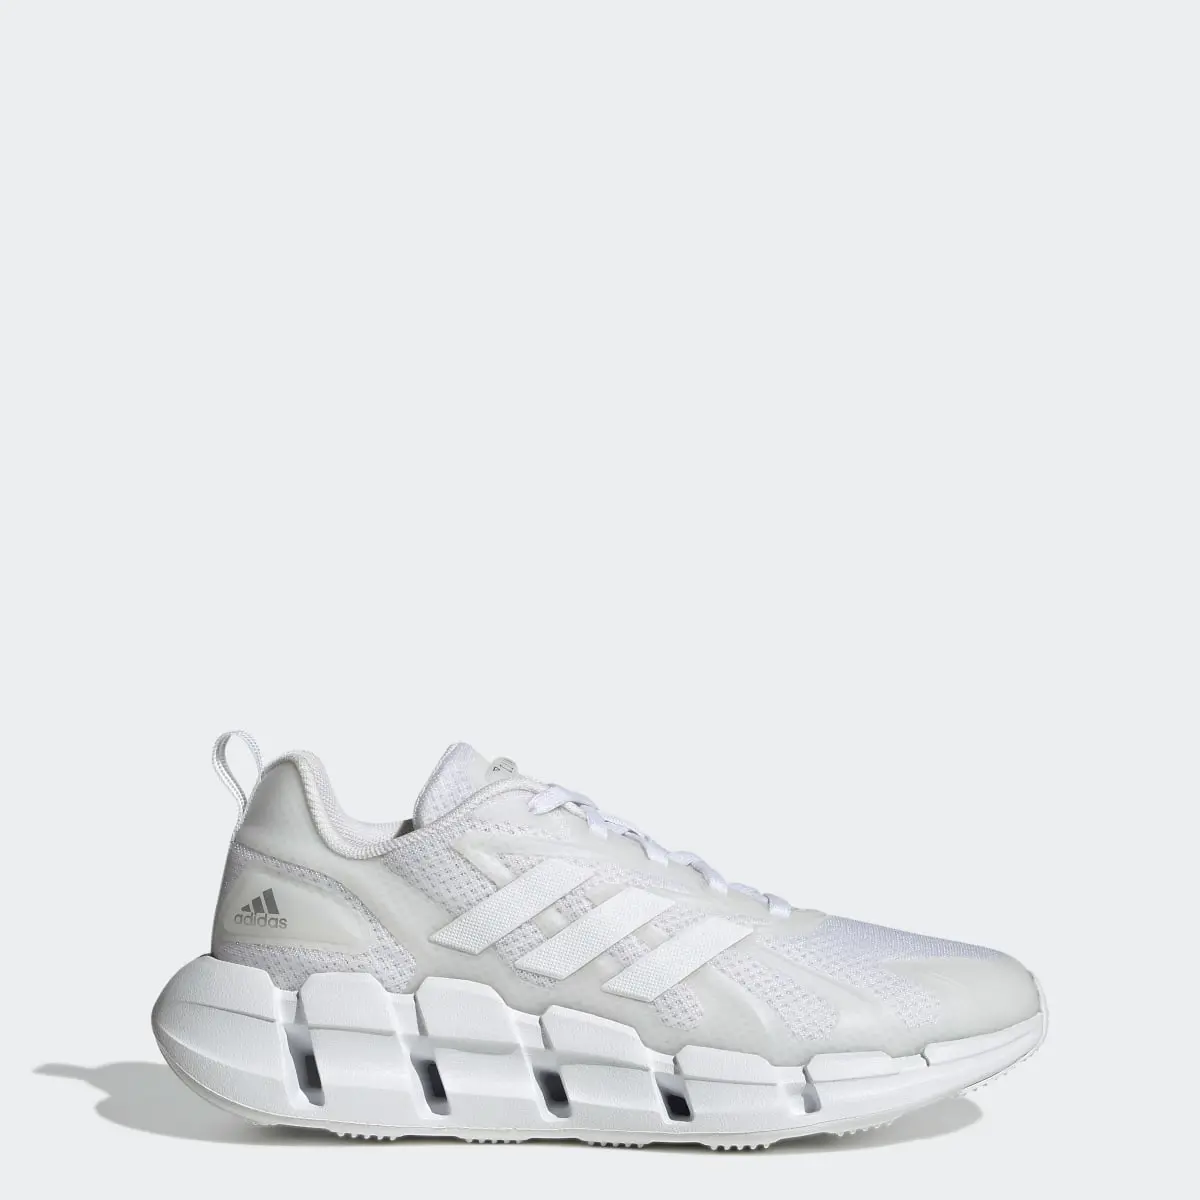 Adidas Ventice Climacool Shoes. 1